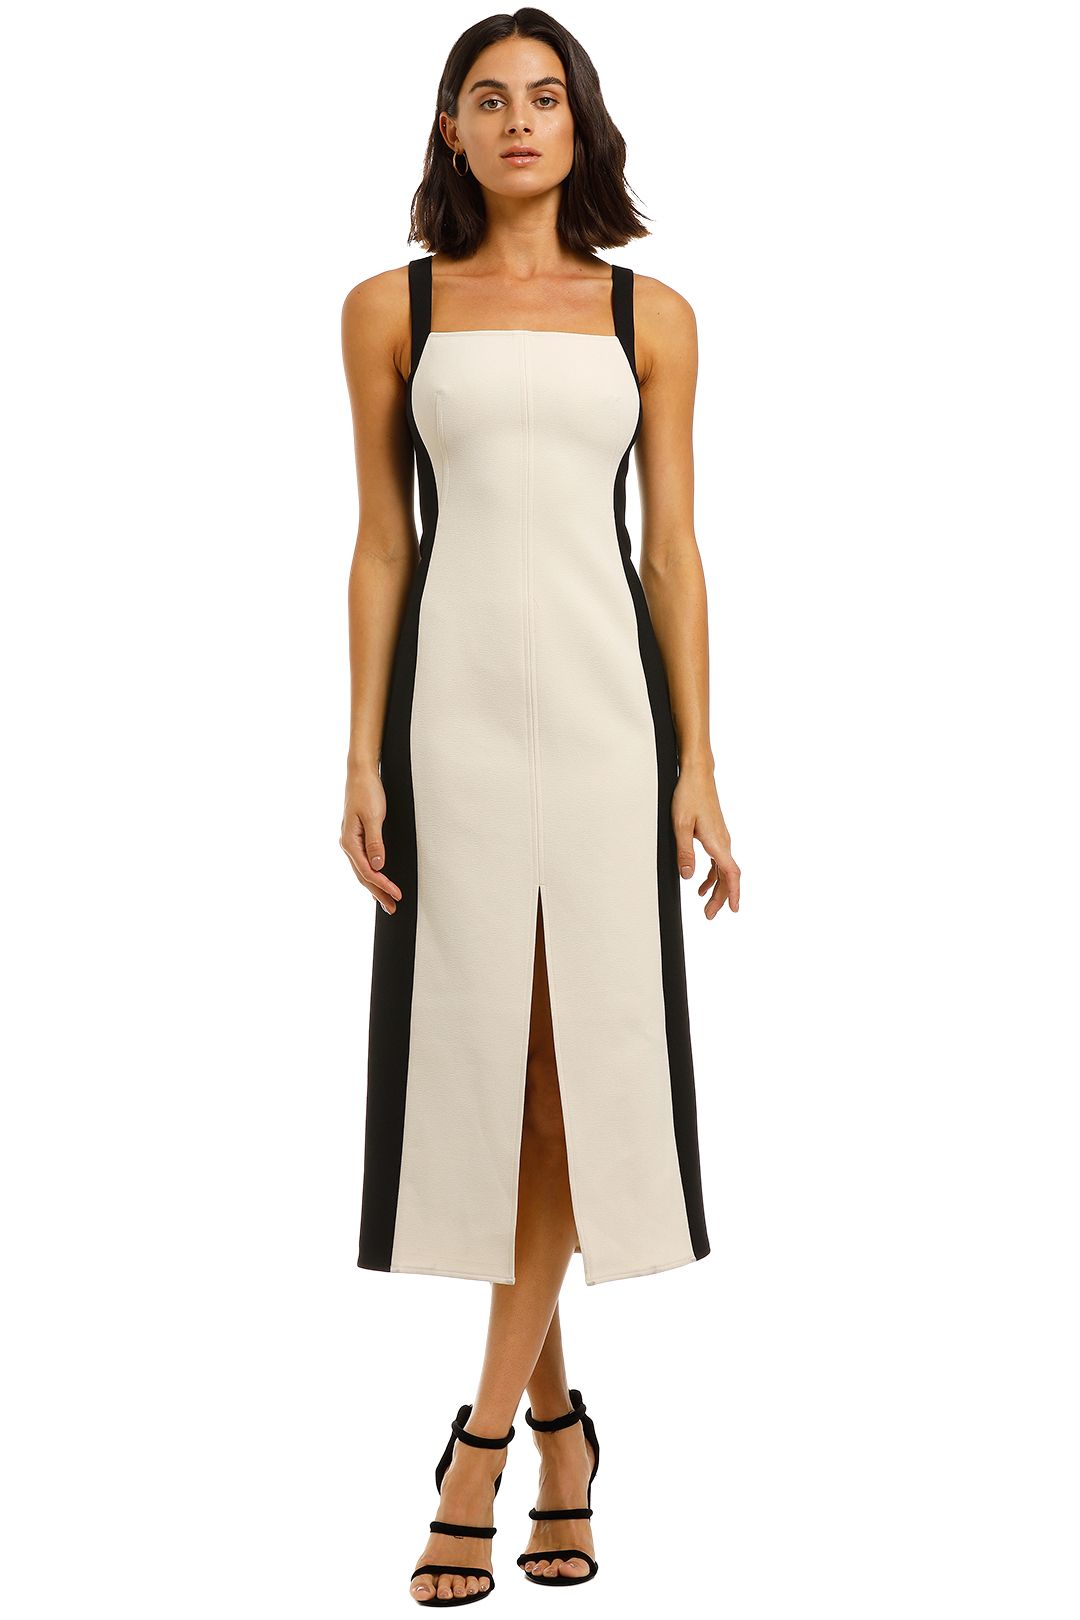 CMEO-Collective-Consumed-Sleeveless-Midi-Dress-Front